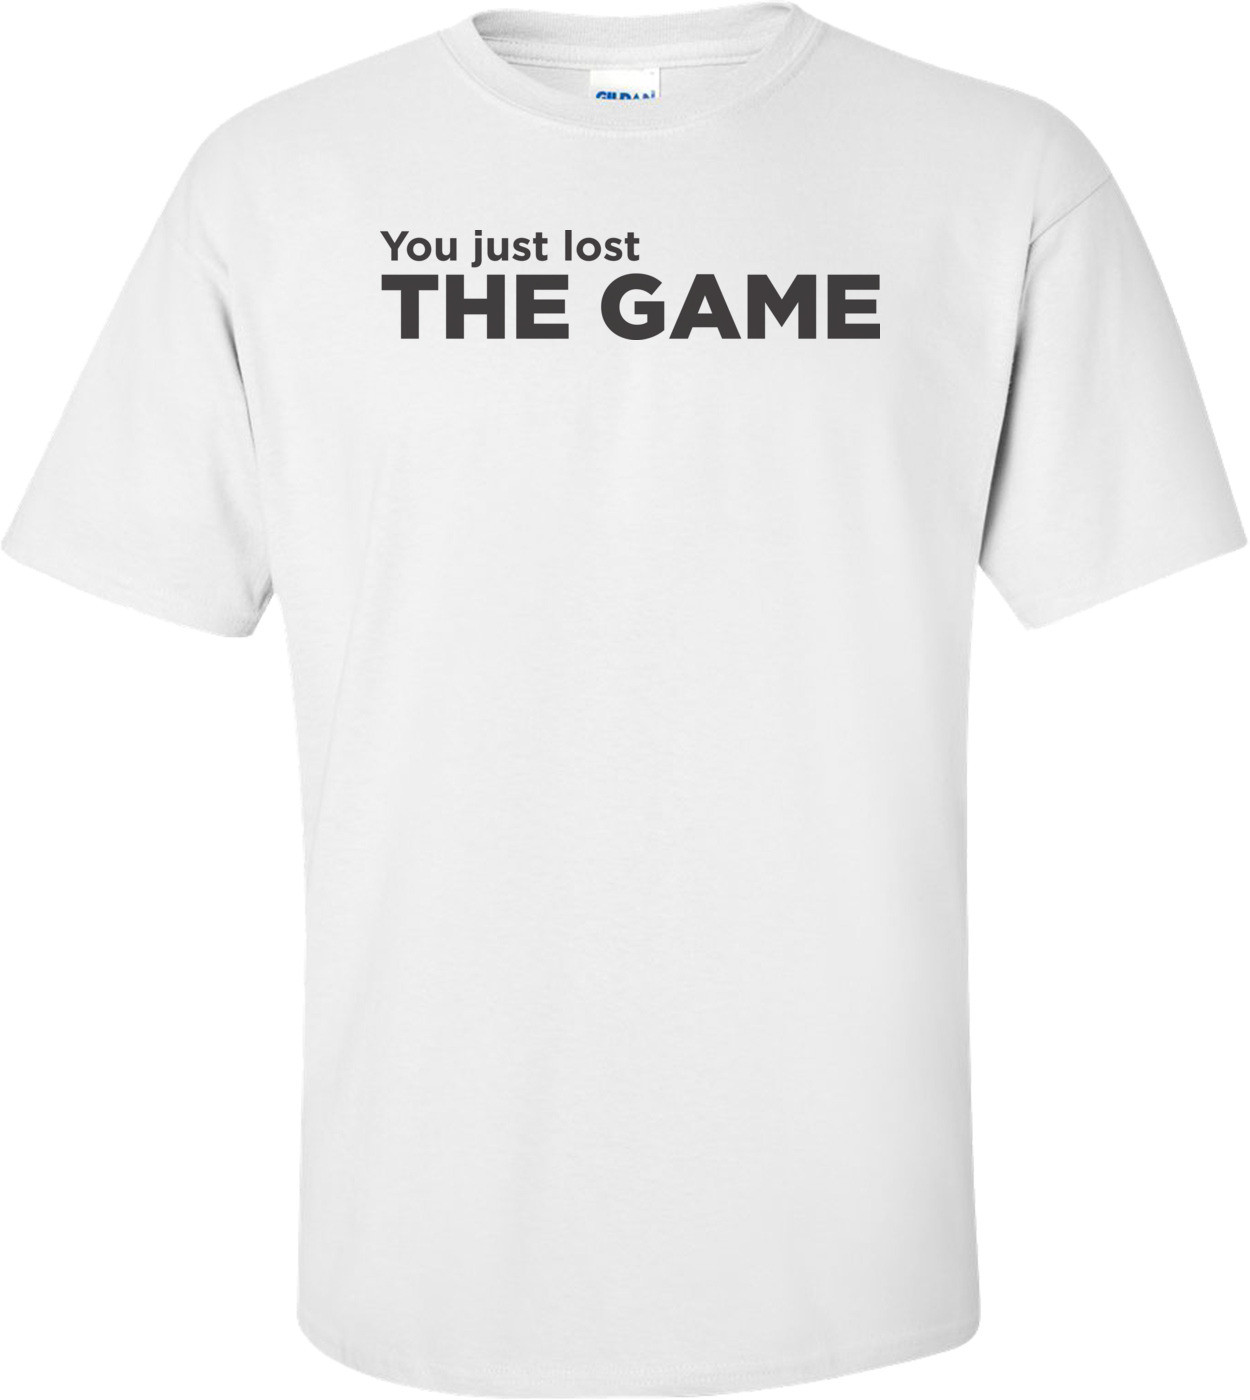 The Game - You Just Lost T-shirt